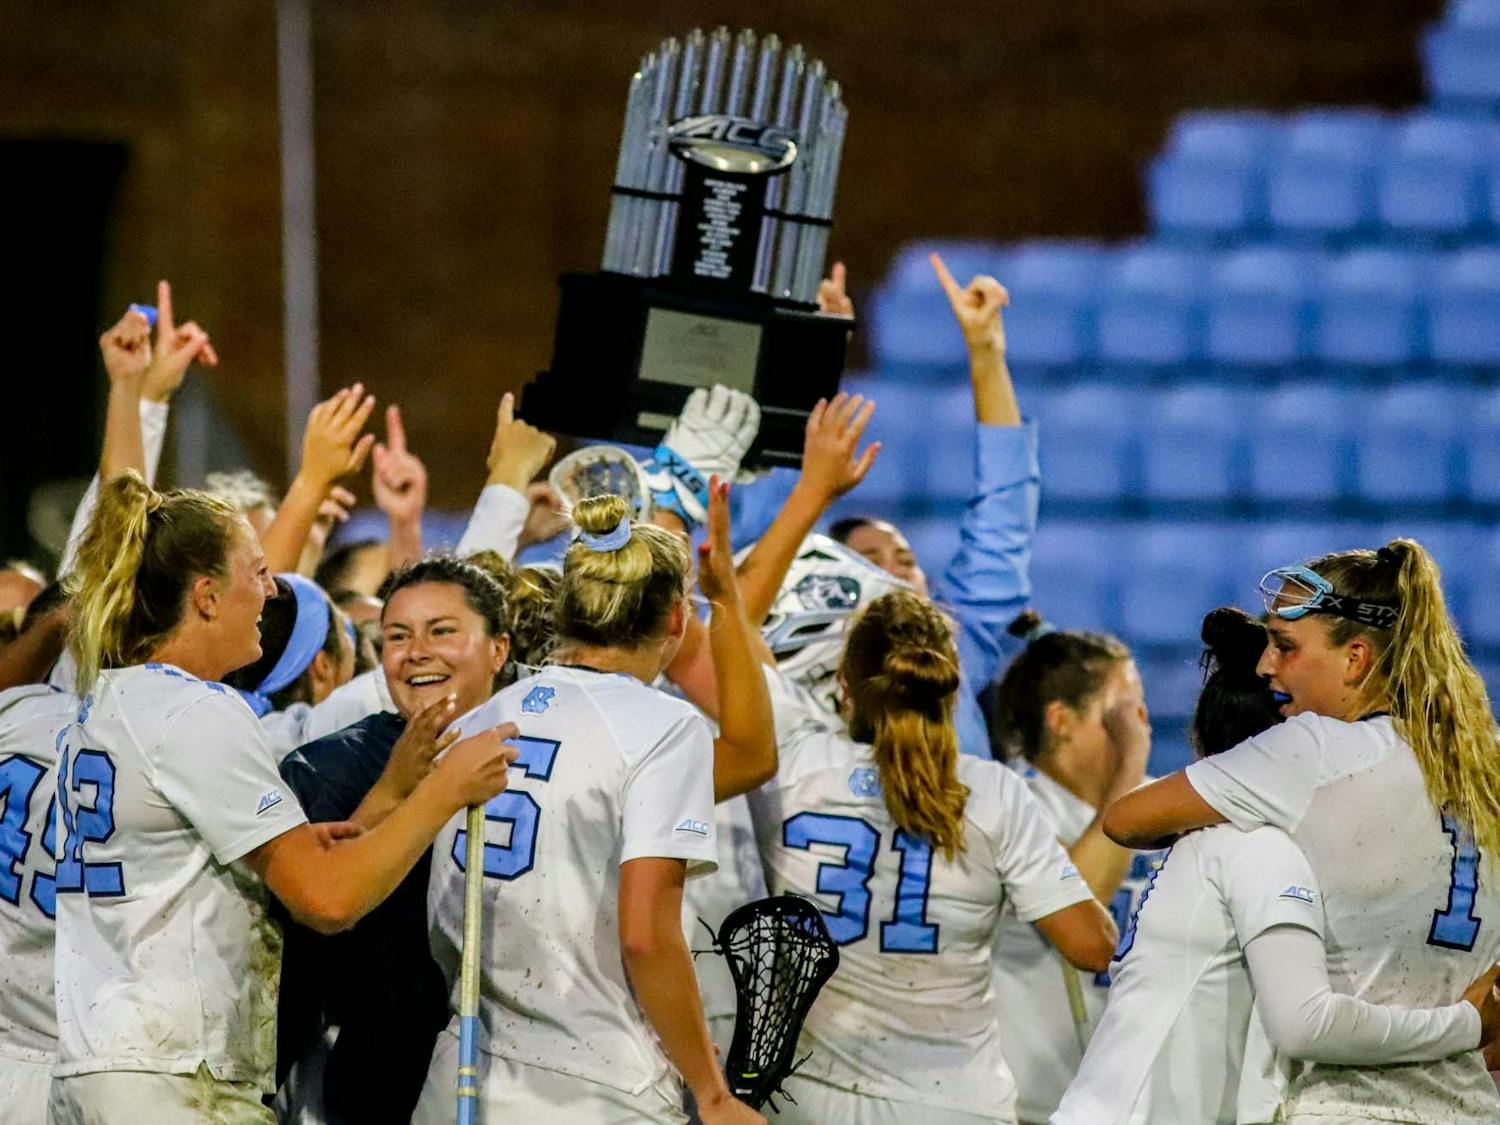 The UNC Women’s lacrosse team celebrates after winning the ACC Championship against Boston College on Saturday, May 7, 2022 in Chapel Hill, NC. The Tar Heels won 16-9.